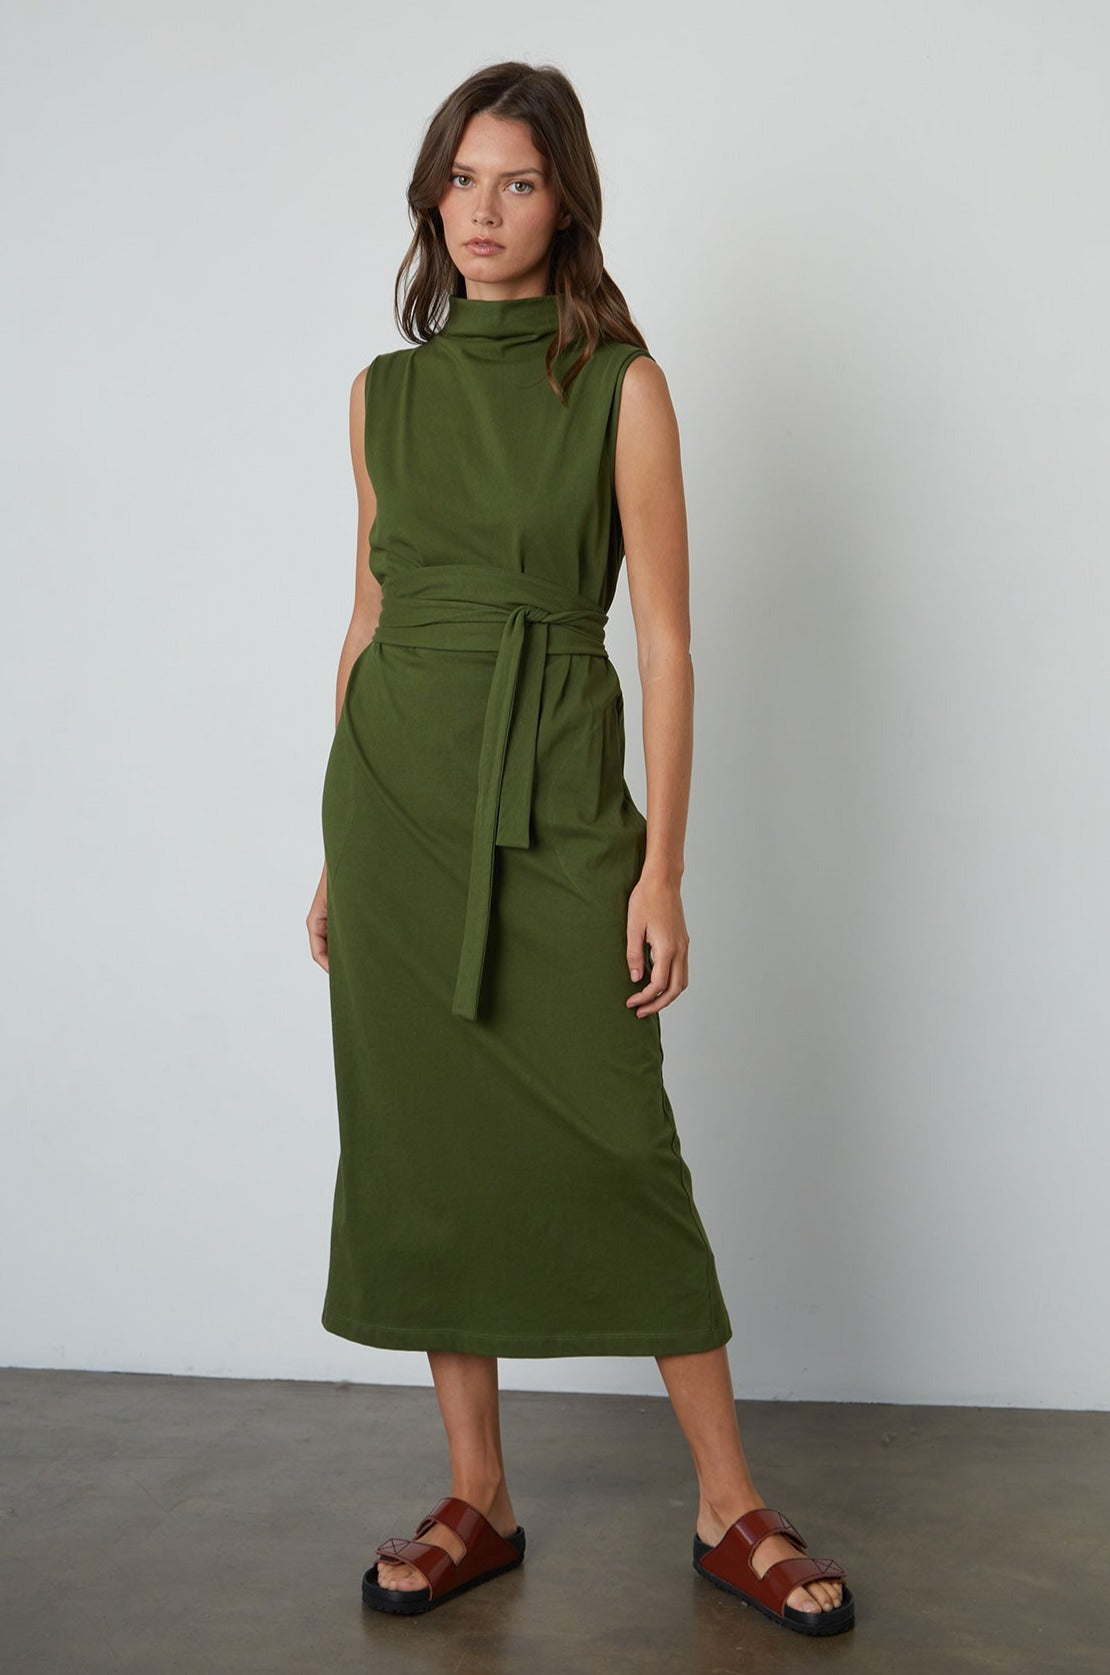 Hydie Mock Neck Dress Structured Cotton in Evergreen with belt front view 3-24994485010625